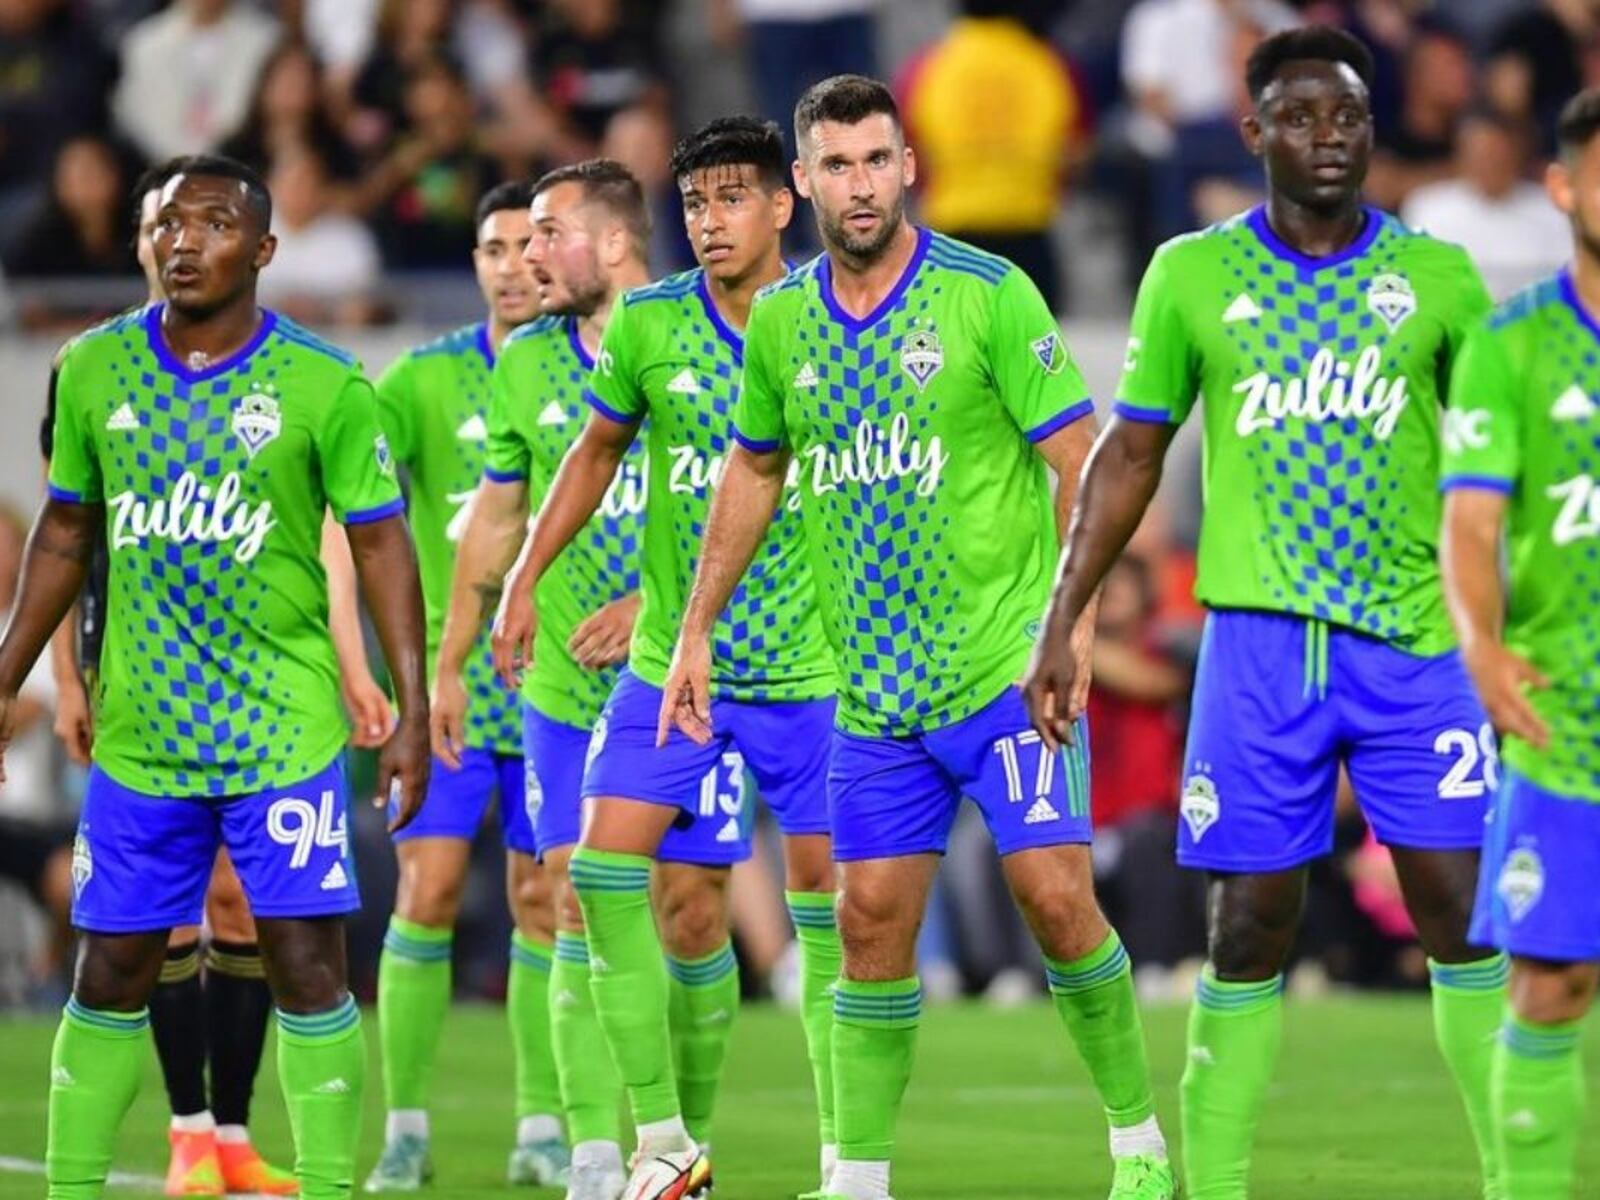 The hard failure of the Seattle Sounders in the MLS